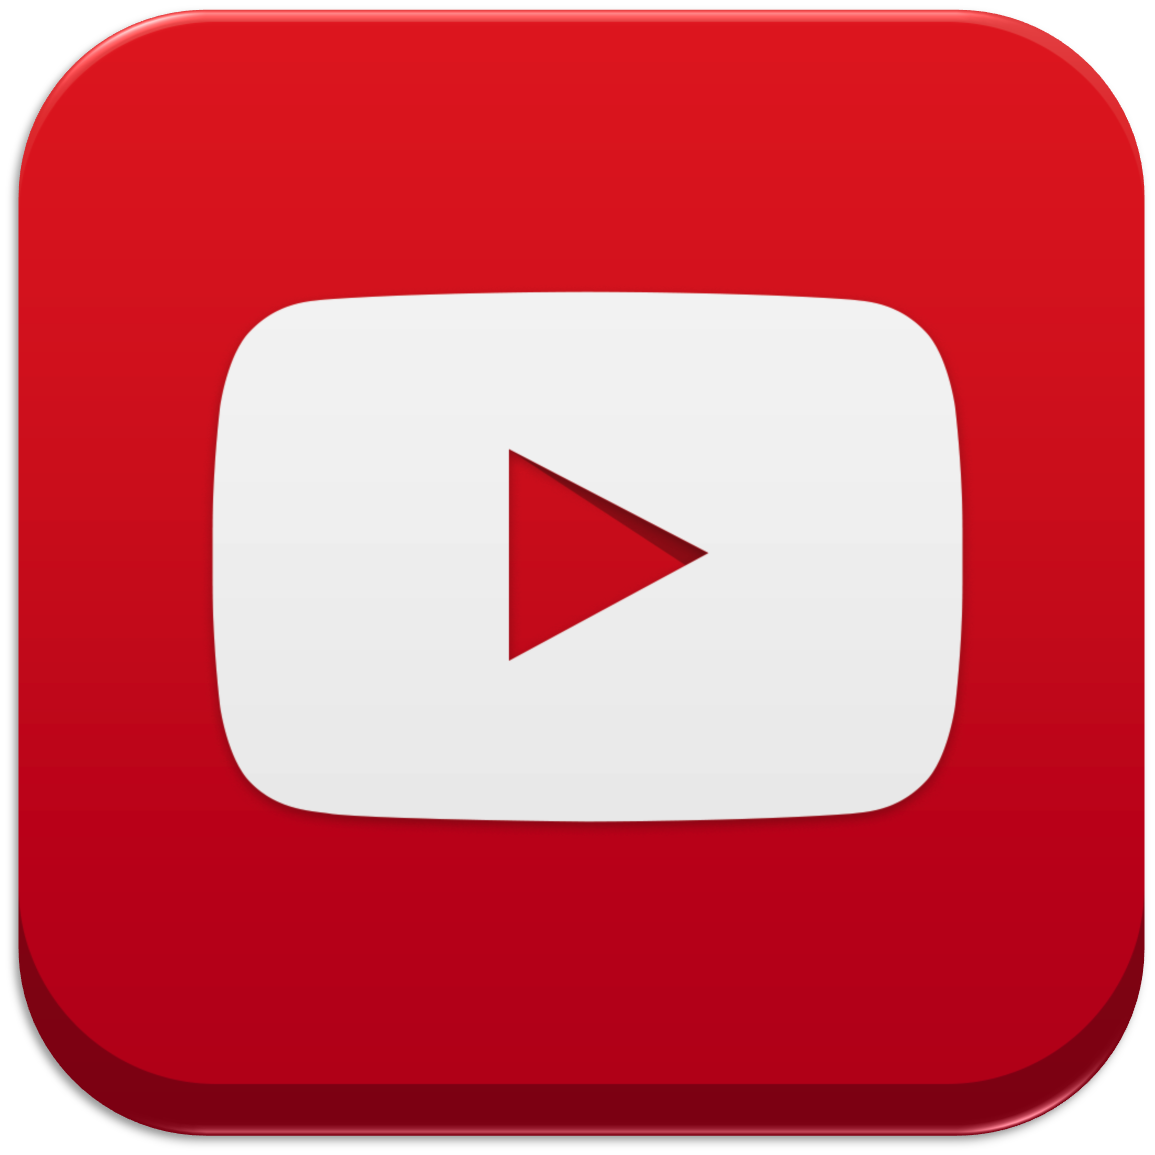 Hq Youtube Png Transparent Youtubepng Images Pluspng